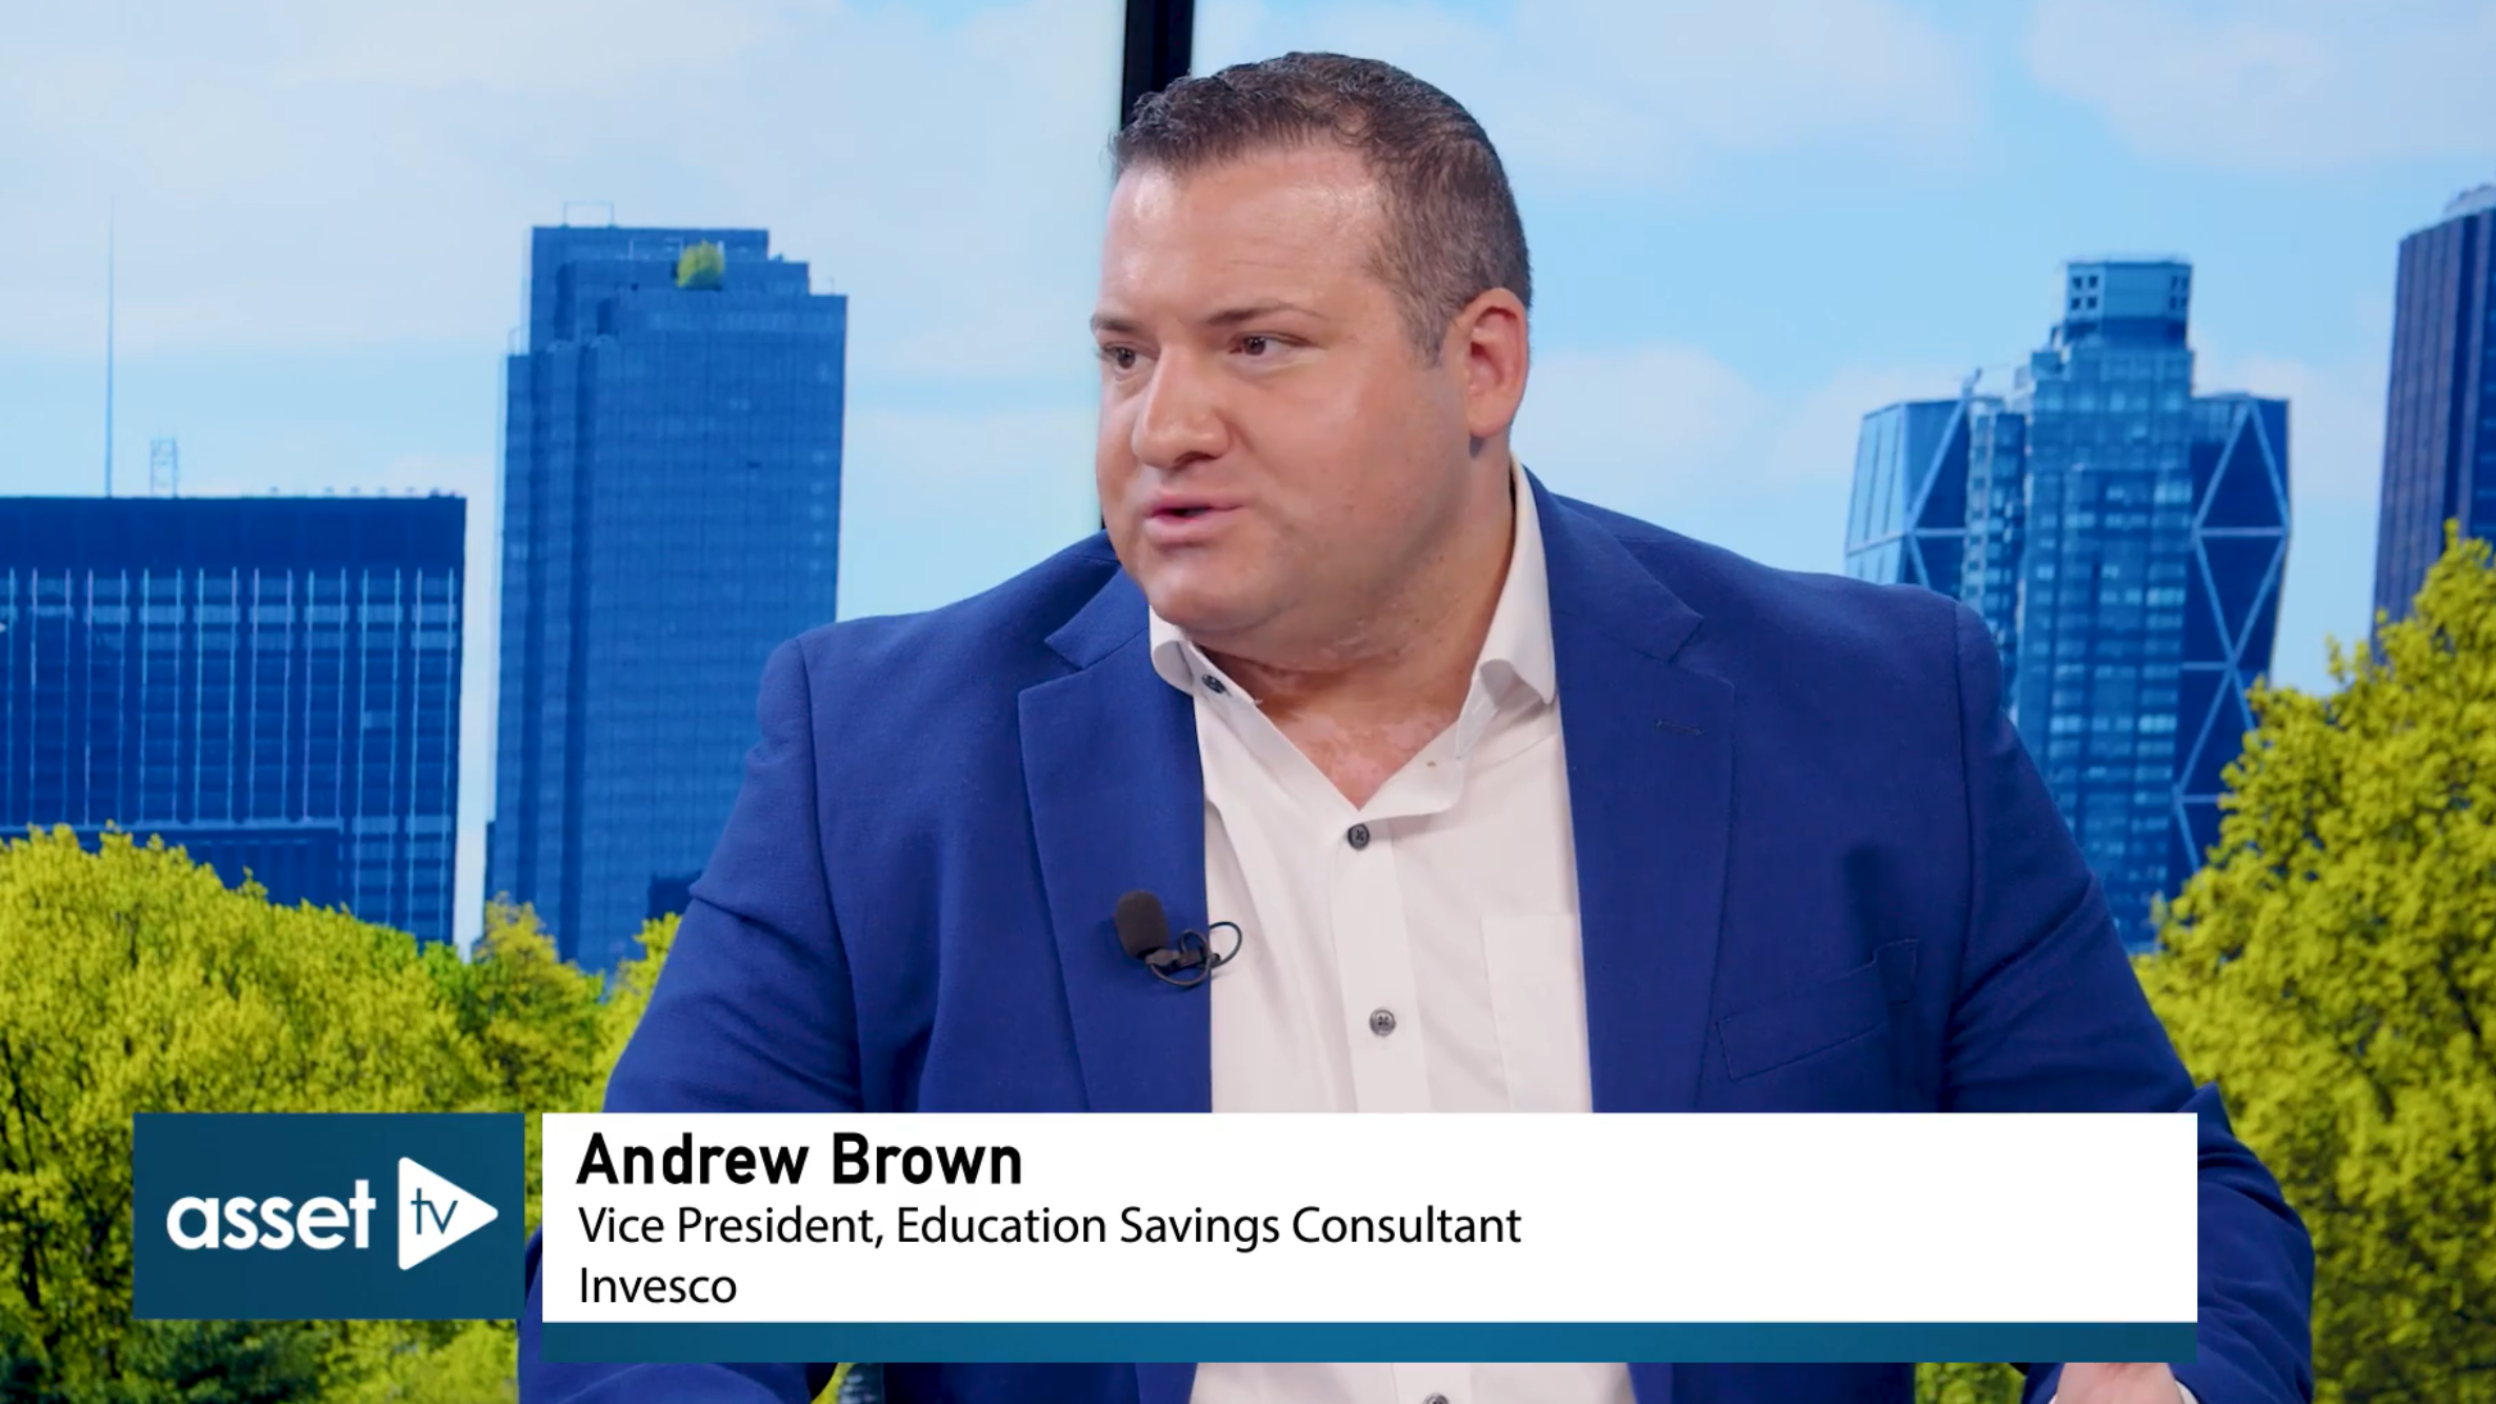 Andrew Brown, Invesco education savings consultant, was a featured panelist for Asset TV discussing 529 plans.